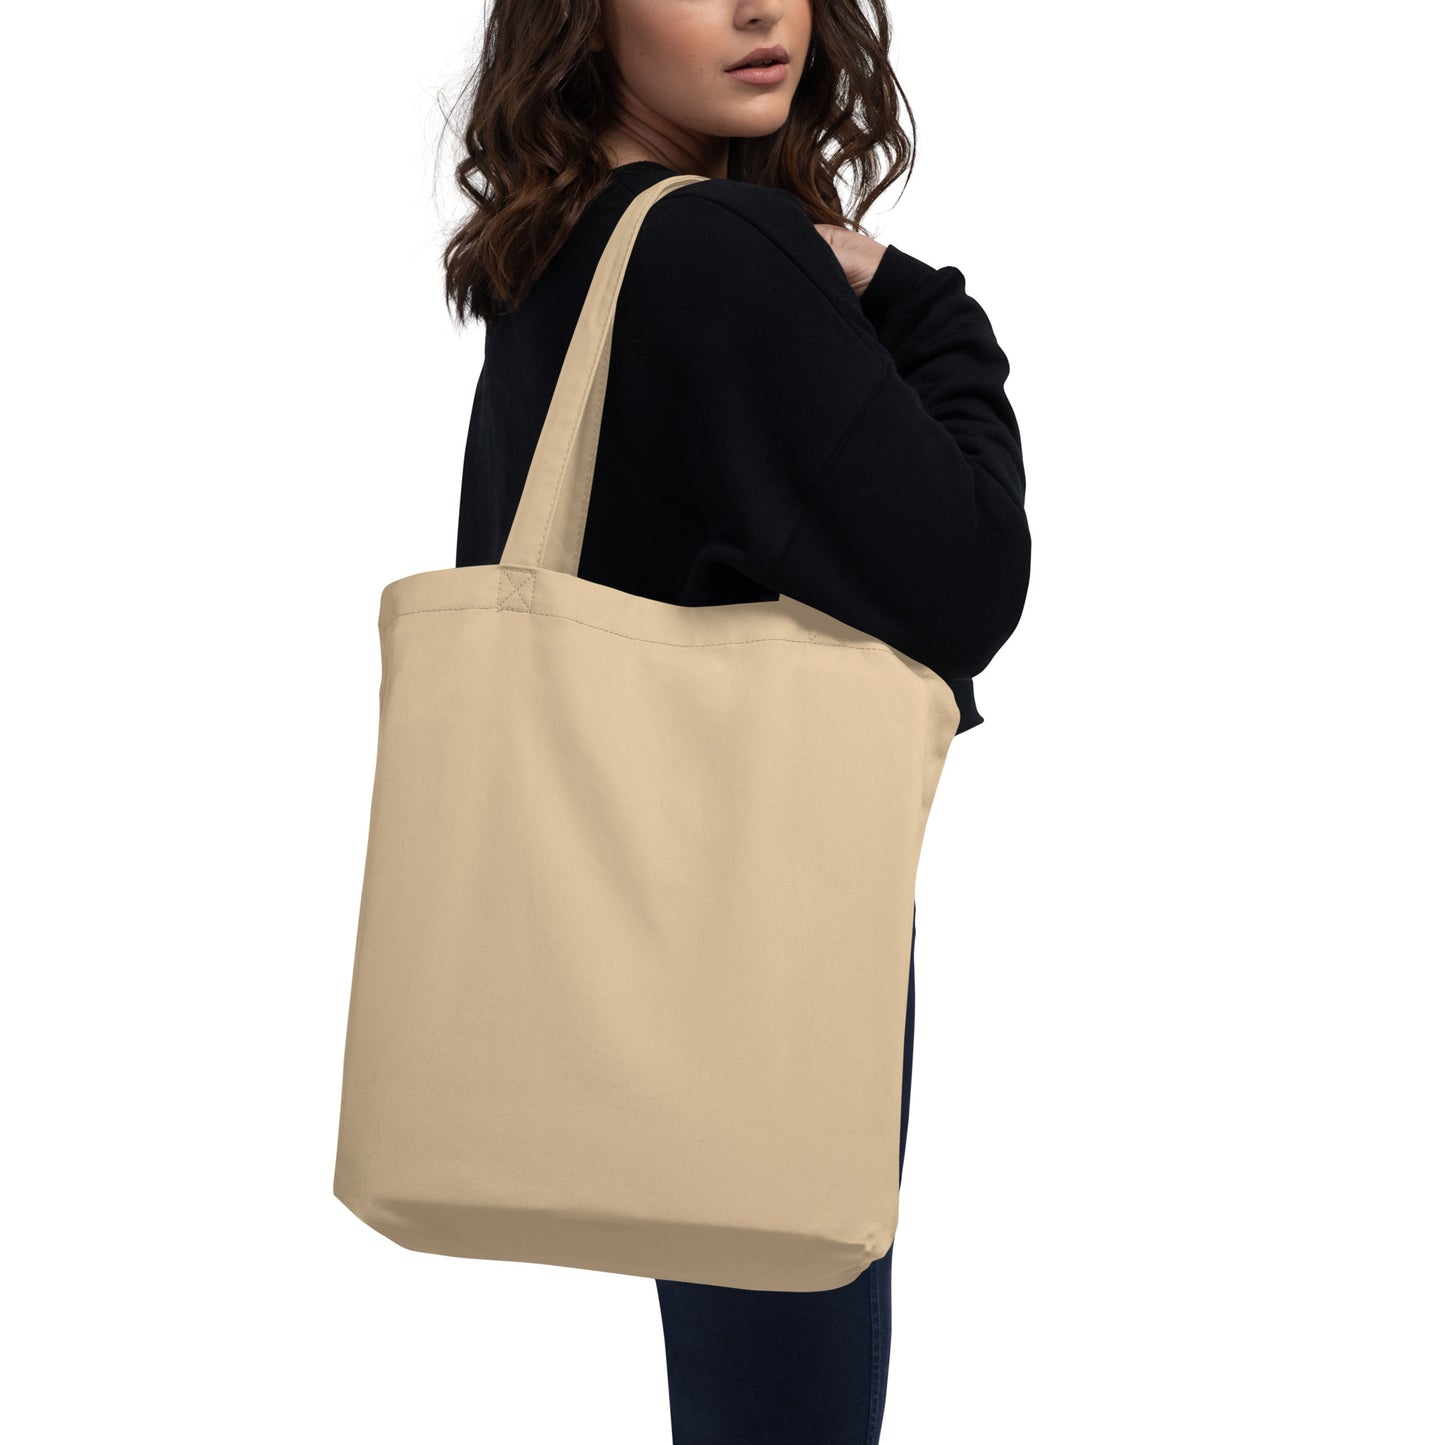 Aviation Gift Organic Tote - Black • IST Istanbul • YHM Designs - Image 06